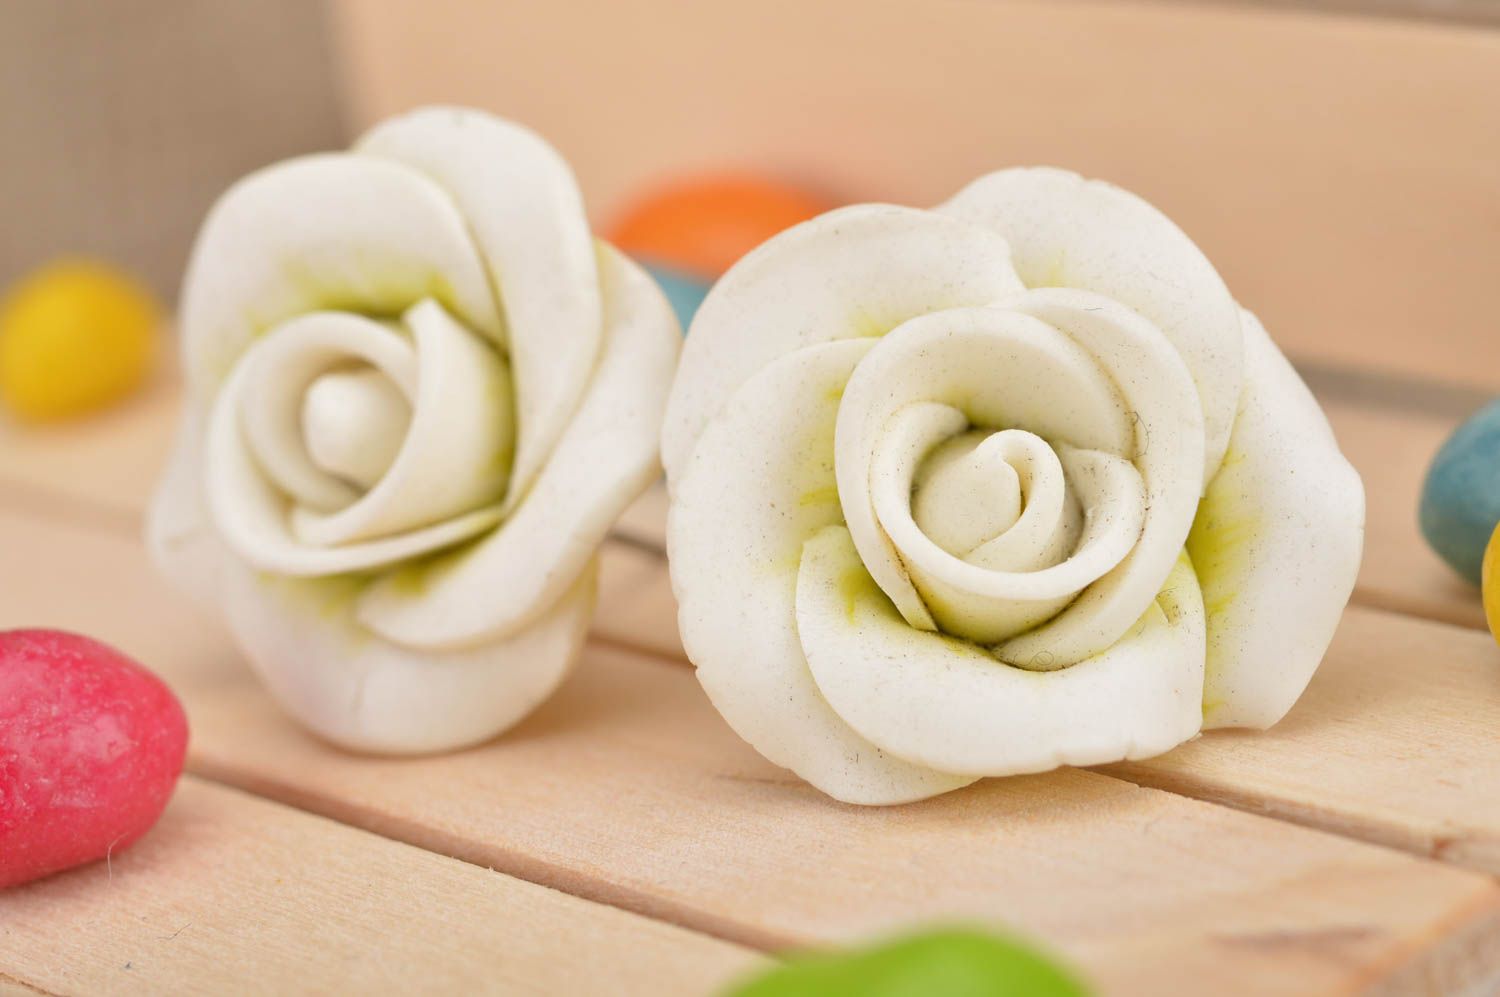 Handmade cute stud earrings made of polymer clay in shape of white roses photo 1